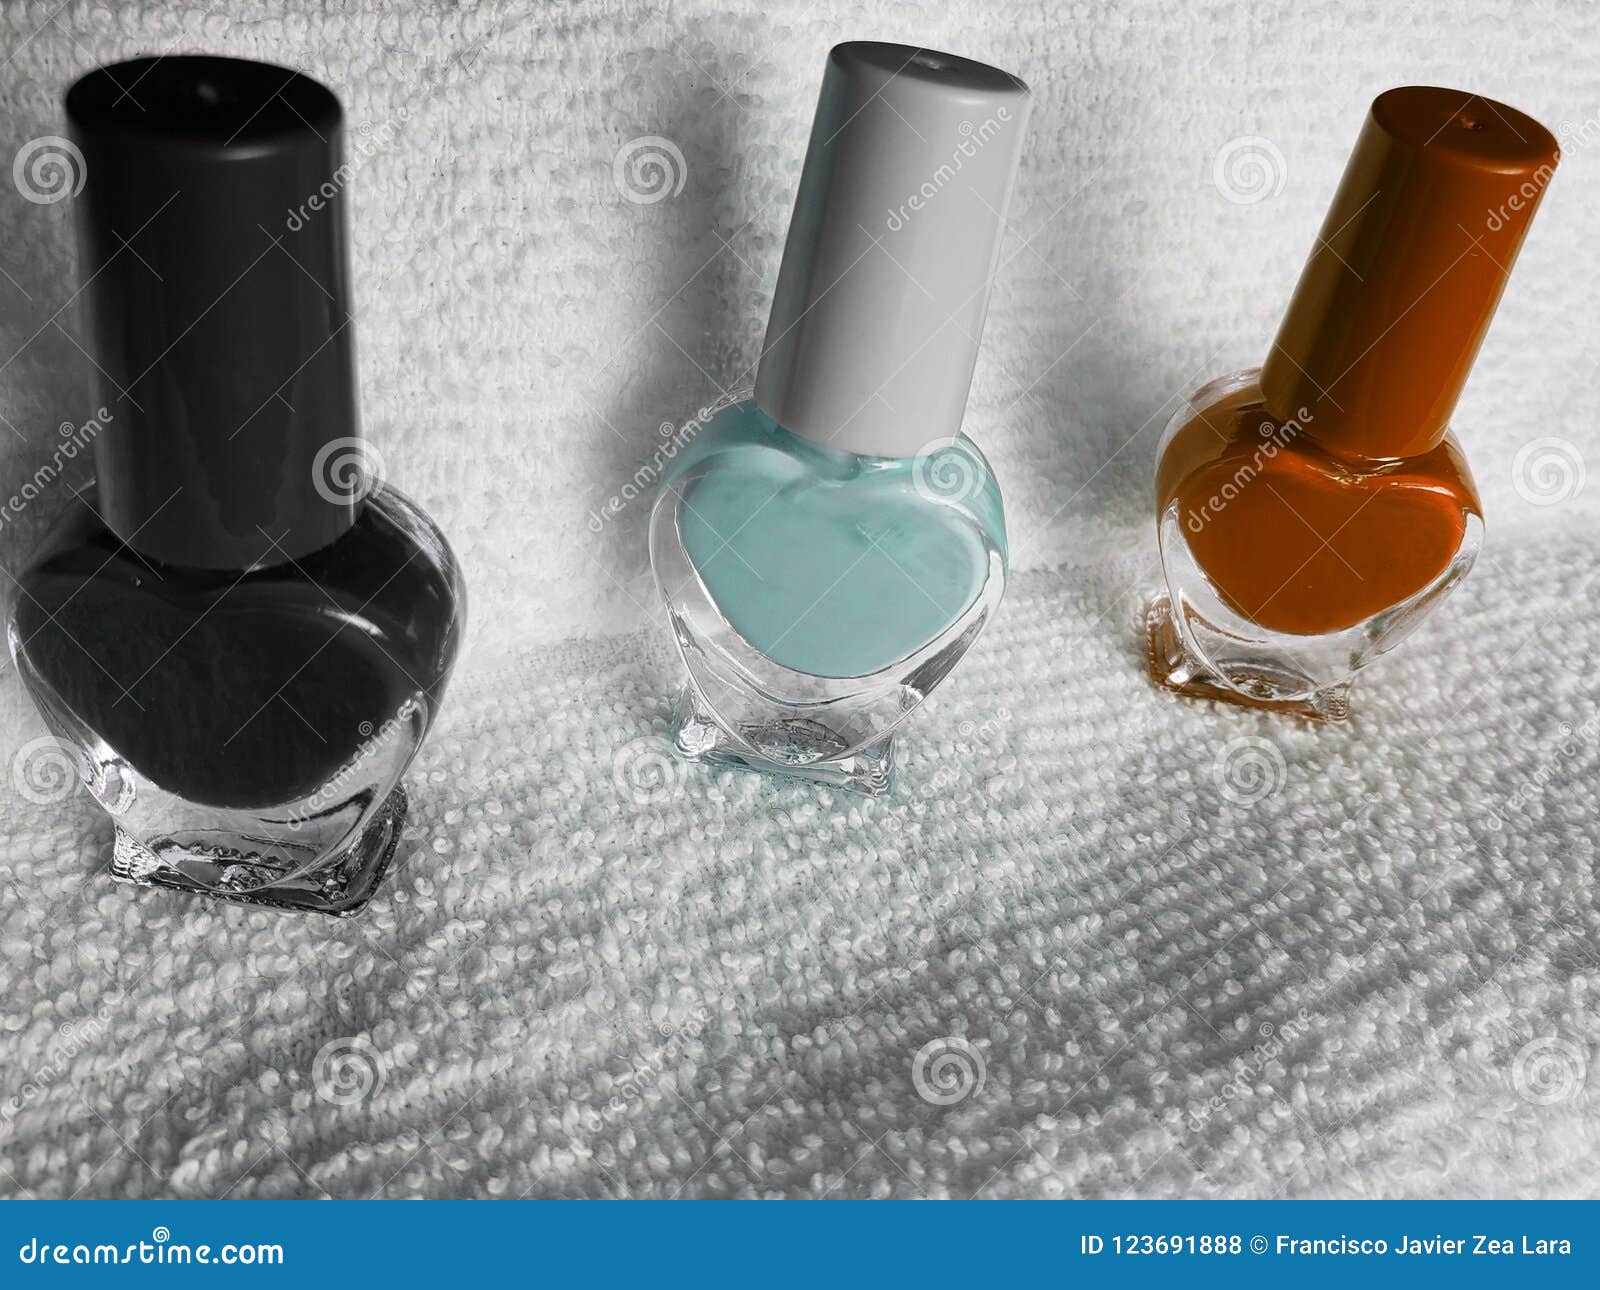 bottles with nail polish in black, light blue and orange, with white background towel